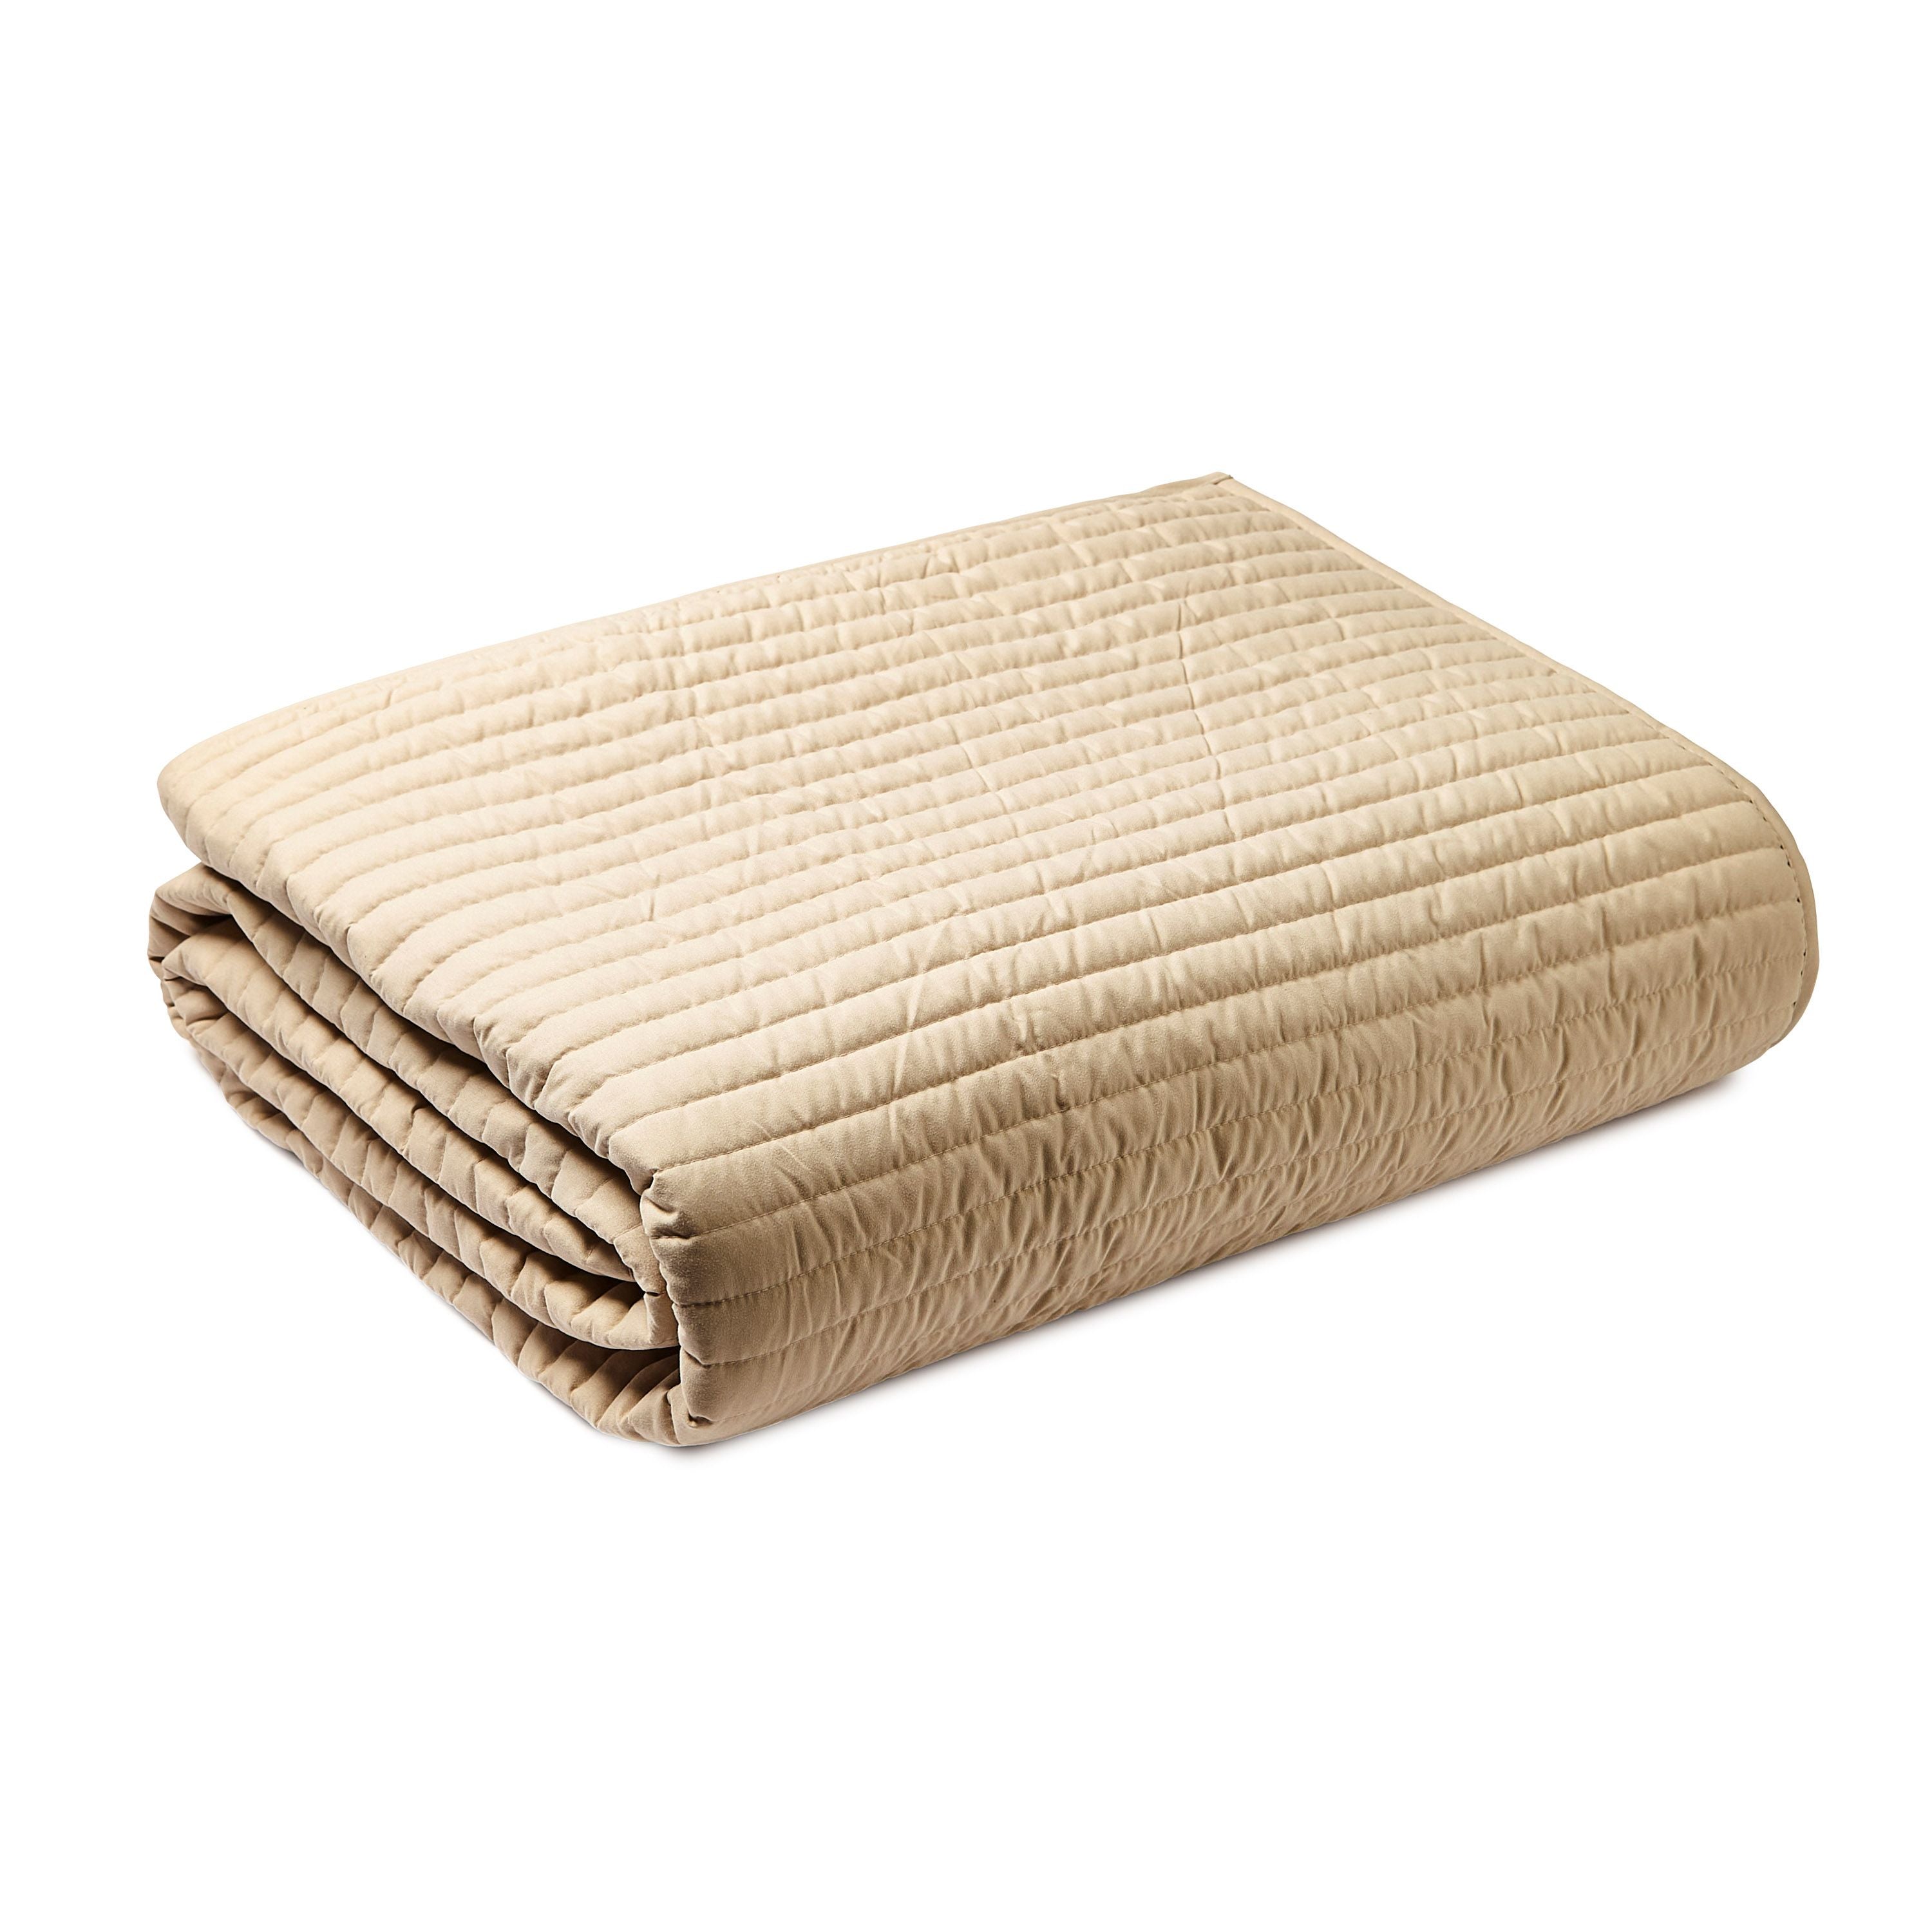 Quilted Lines Bedspread, Natural